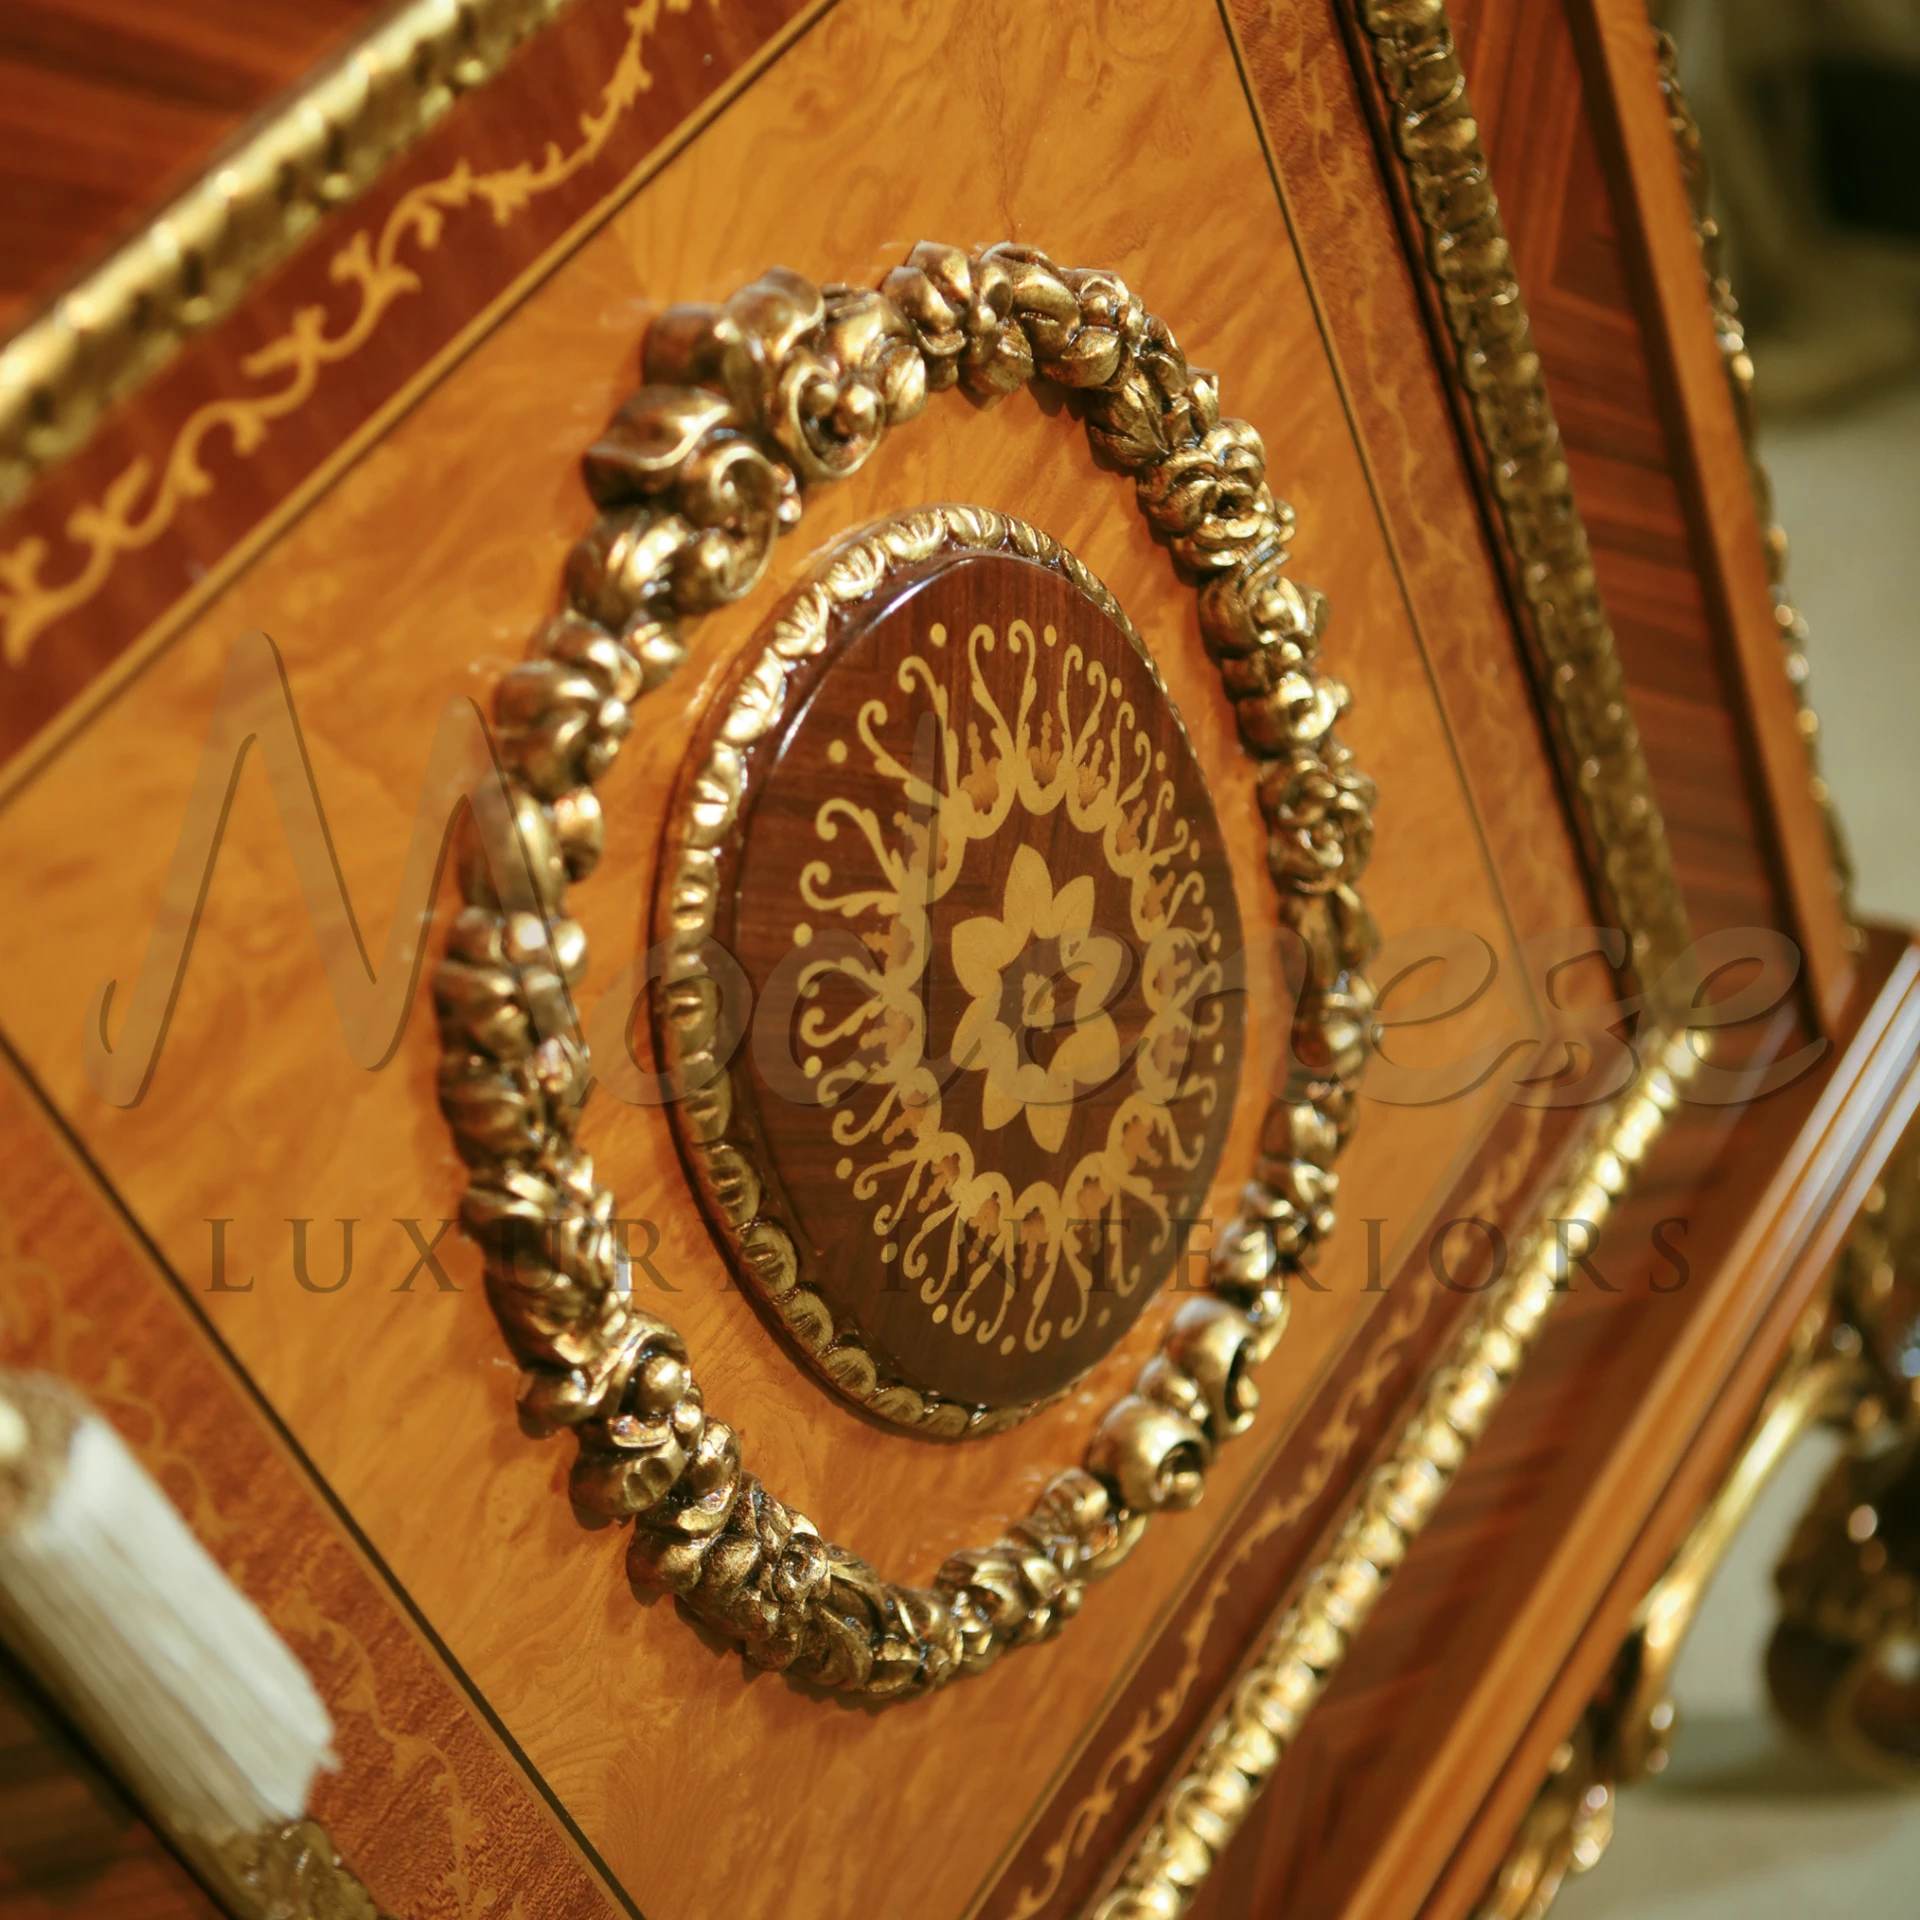 A close up view of the door design of baroque sideboard.